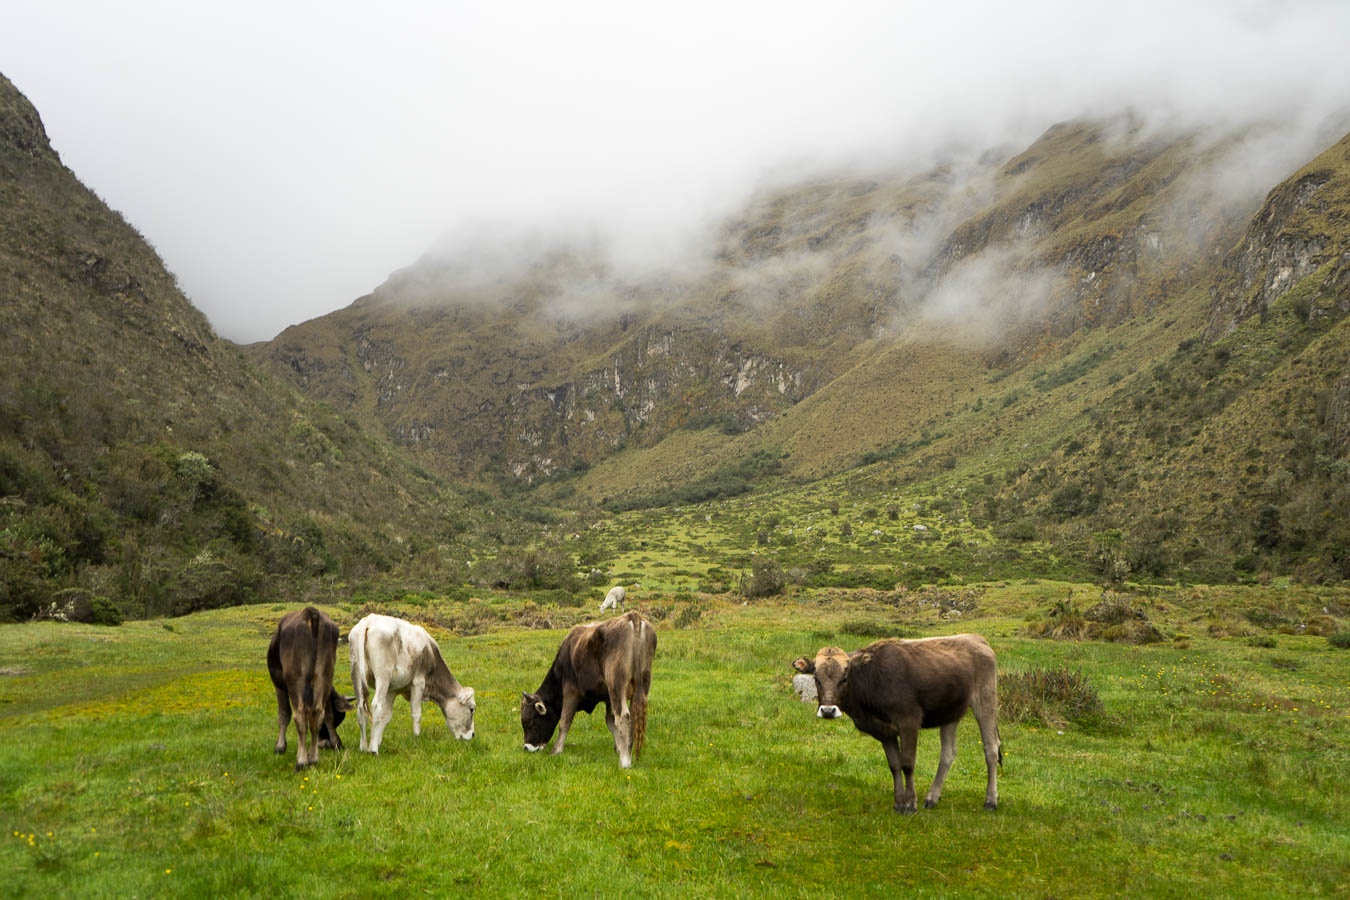 Cows grazing on a high mountain plateau